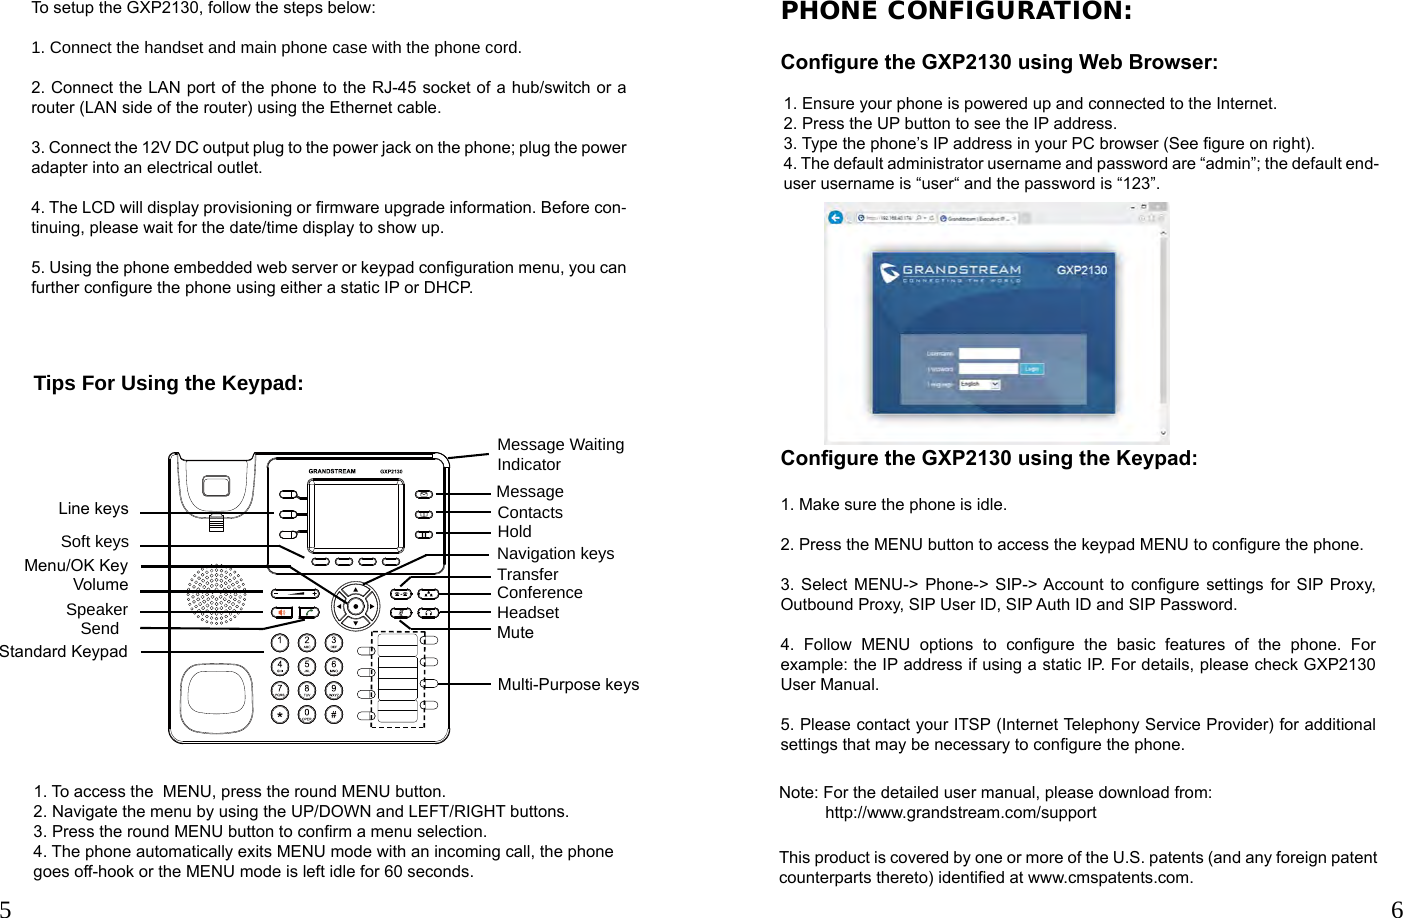 5 6Note: For the detailed user manual, please download from:            http://www.grandstream.com/supportThis product is covered by one or more of the U.S. patents (and any foreign patent counterparts thereto) identied at www.cmspatents.com.Tips For Using the Keypad:PHONE CONFIGURATION:Congure the GXP2130 using Web Browser:1. To access the  MENU, press the round MENU button.2. Navigate the menu by using the UP/DOWN and LEFT/RIGHT buttons.3. Press the round MENU button to conrm a menu selection.4. The phone automatically exits MENU mode with an incoming call, the phone goes off-hook or the MENU mode is left idle for 60 seconds.1. Ensure your phone is powered up and connected to the Internet.2. Press the UP button to see the IP address. 3. Type the phone’s IP address in your PC browser (See gure on right).4. The default administrator username and password are “admin”; the default end-user username is “user“ and the password is “123”.Congure the GXP2130 using the Keypad:1. Make sure the phone is idle.2. Press the MENU button to access the keypad MENU to congure the phone.3. Select MENU-&gt; Phone-&gt; SIP-&gt; Account  to congure settings for SIP Proxy, Outbound Proxy, SIP User ID, SIP Auth ID and SIP Password.4.  Follow  MENU  options  to  congure  the  basic  features  of  the  phone.  For example: the IP address if using a static IP. For details, please check GXP2130 User Manual.5. Please contact your ITSP (Internet Telephony Service Provider) for additional settings that may be necessary to congure the phone.Message Waiting IndicatorMulti-Purpose keys Message Contacts Transfer Hold Headset Conference MuteStandard KeypadNavigation keysSendLine keysSoft keysVolumeSpeakerMenu/OK KeyTo setup the GXP2130, follow the steps below:1. Connect the handset and main phone case with the phone cord.2. Connect the LAN port of the phone to the RJ-45 socket of a hub/switch or a router (LAN side of the router) using the Ethernet cable.3. Connect the 12V DC output plug to the power jack on the phone; plug the power adapter into an electrical outlet.4. The LCD will display provisioning or rmware upgrade information. Before con-tinuing, please wait for the date/time display to show up. 5. Using the phone embedded web server or keypad conguration menu, you can further congure the phone using either a static IP or DHCP.